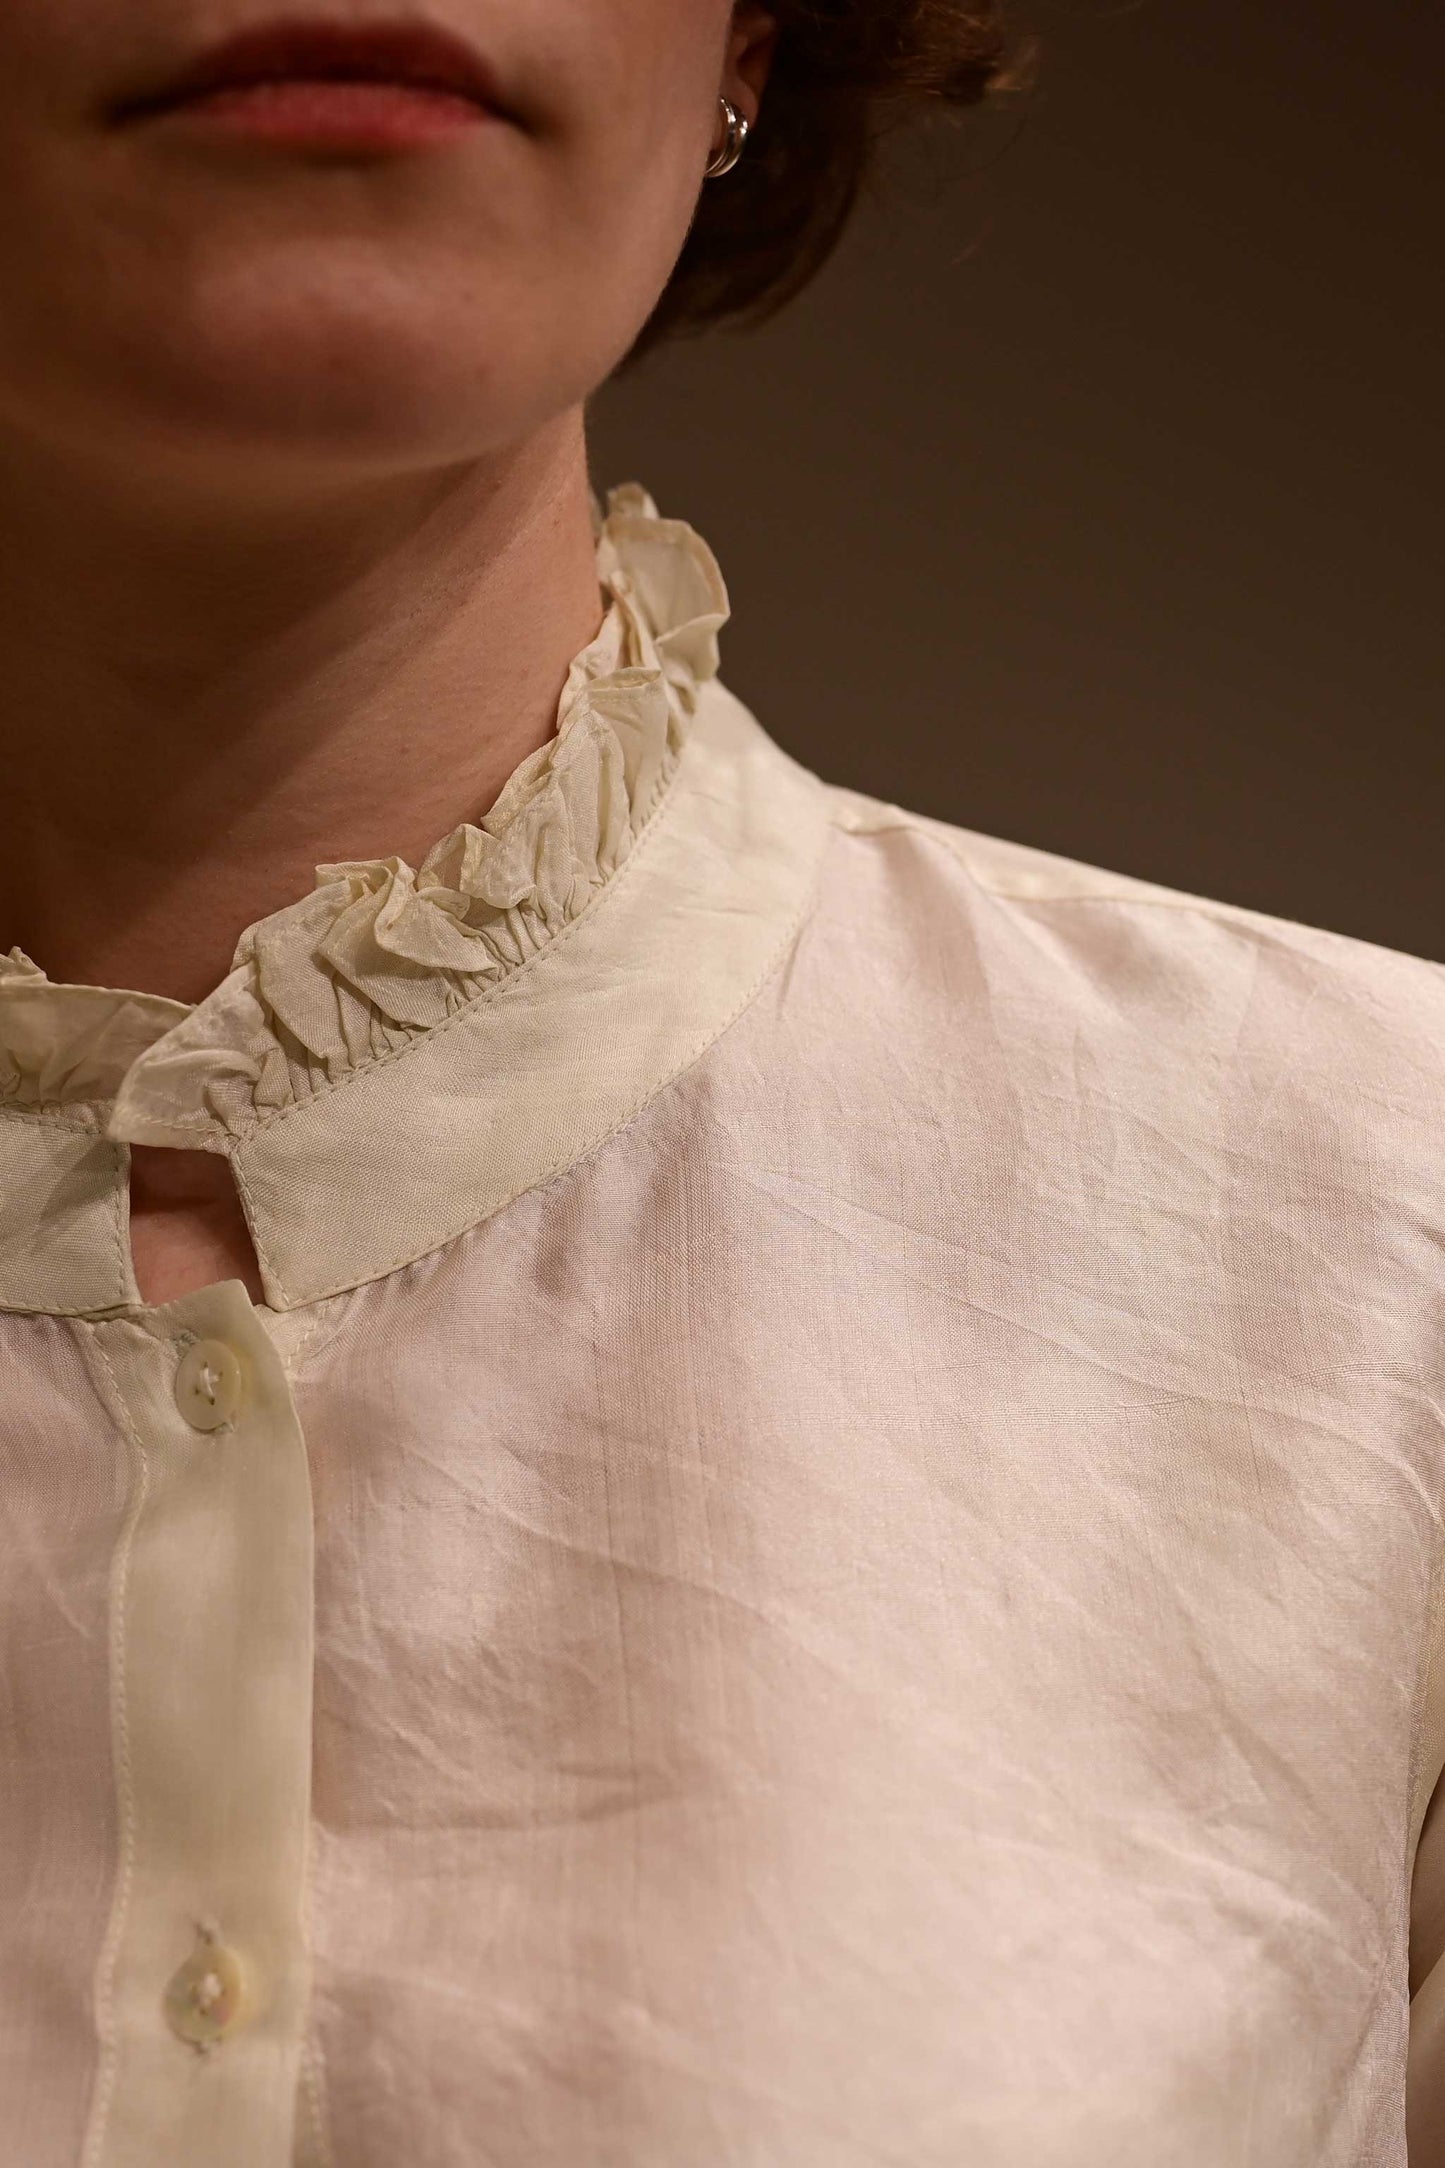 Closse up of the ruffled collar of ivory white silk shirt that is hand reeled and hand spun in India.